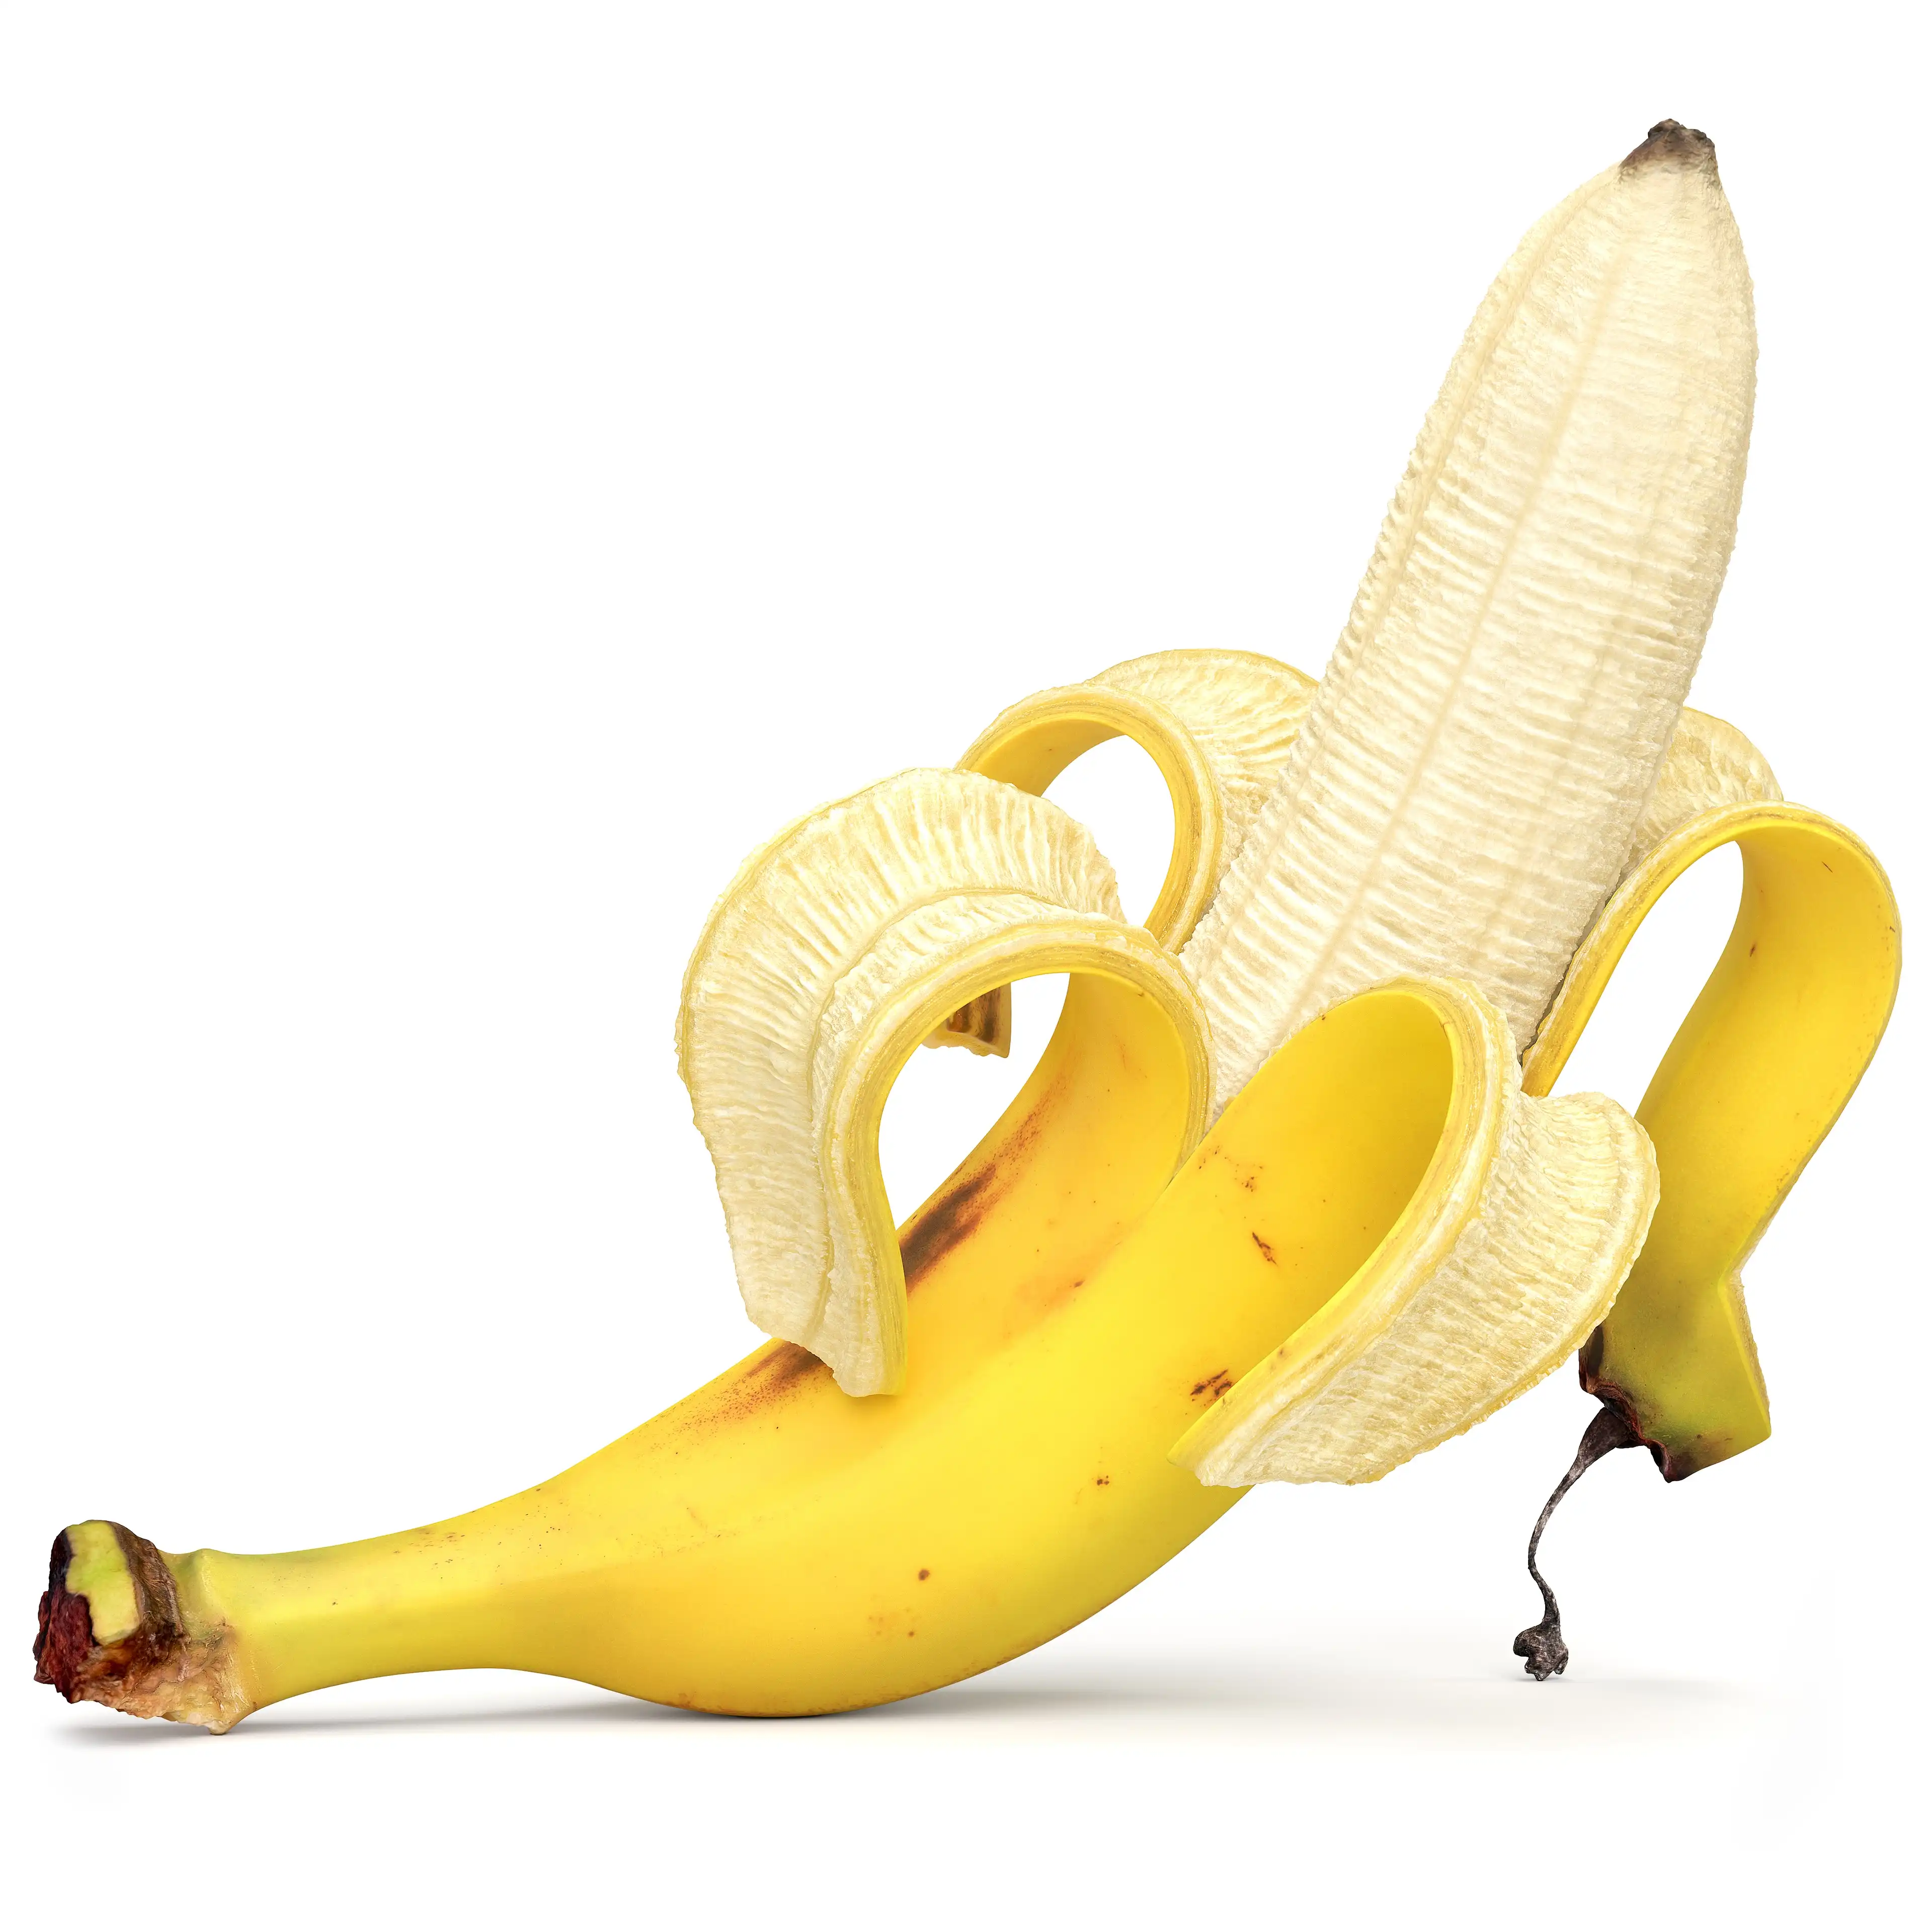 peeled banana 3d illustration in a white studio with soft shadow beneath